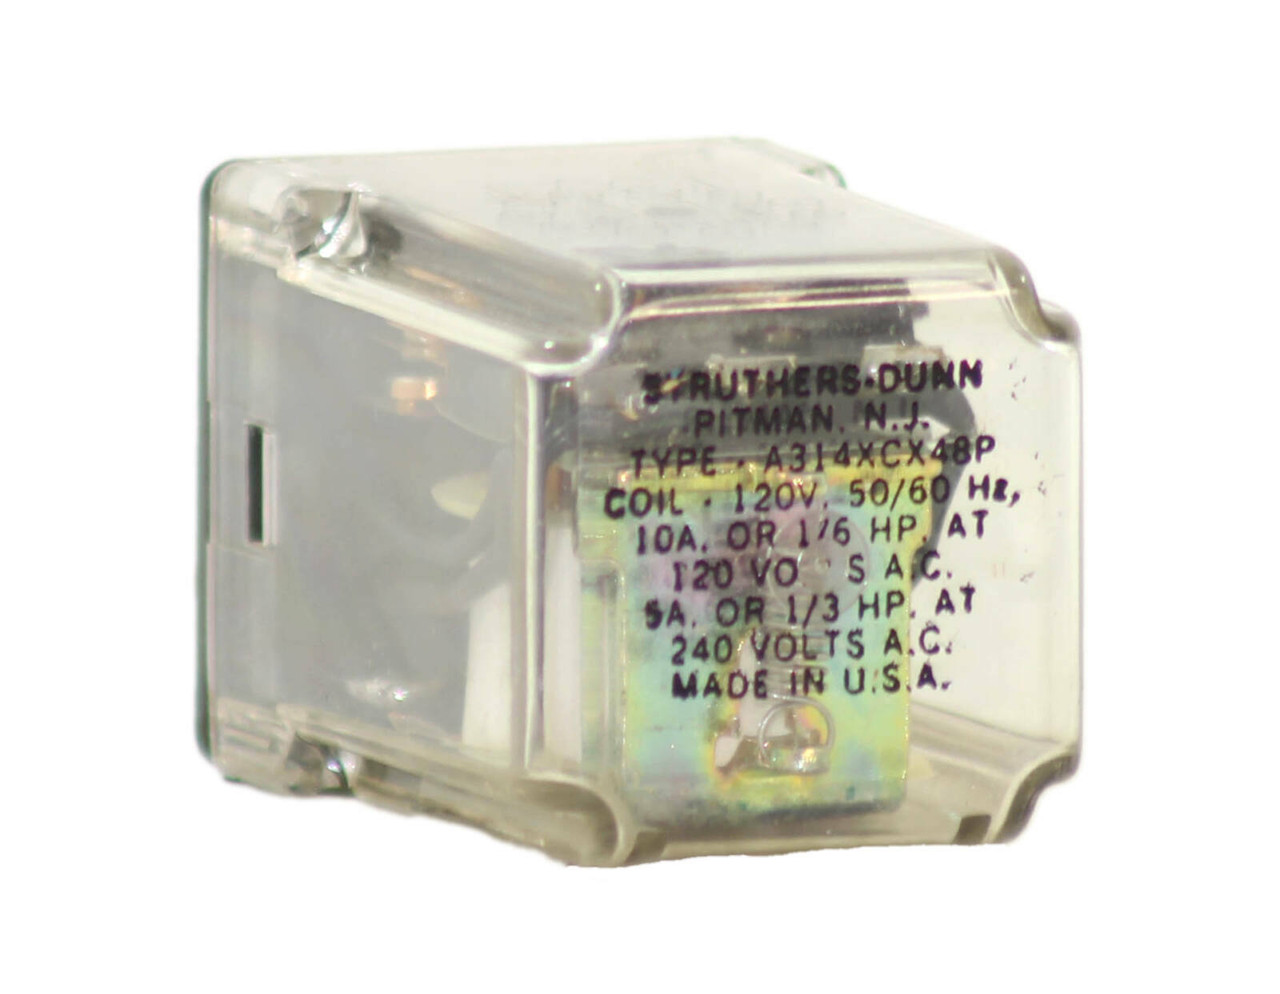 Struthers-Dunn A314XCX48P Relay 10A 120V 11PINS 50/60Hz